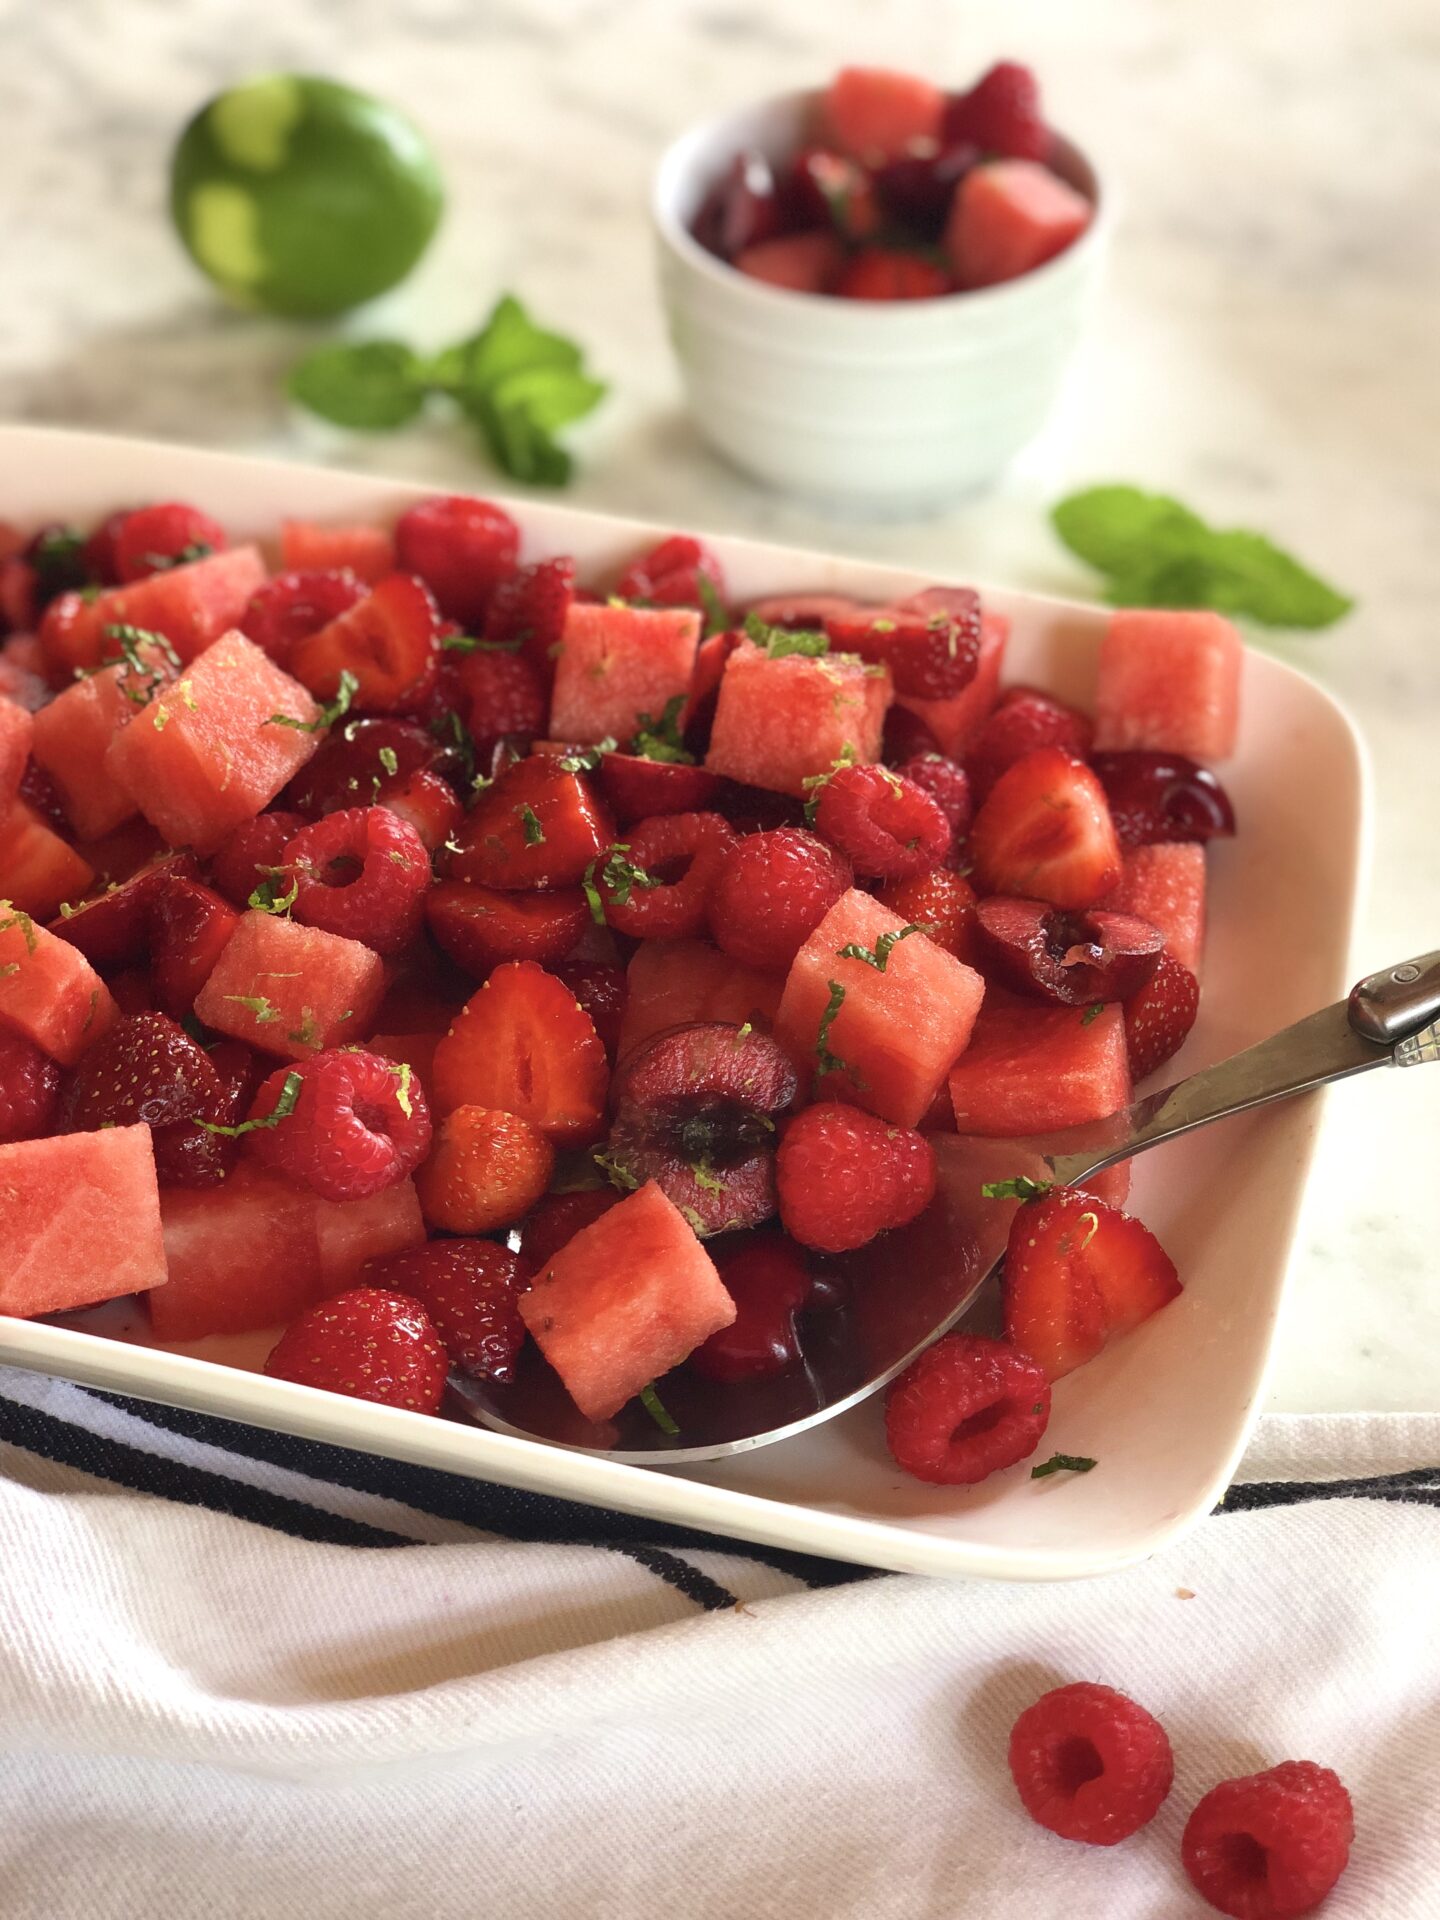 Red fruit salad with berries cherries and watermelon